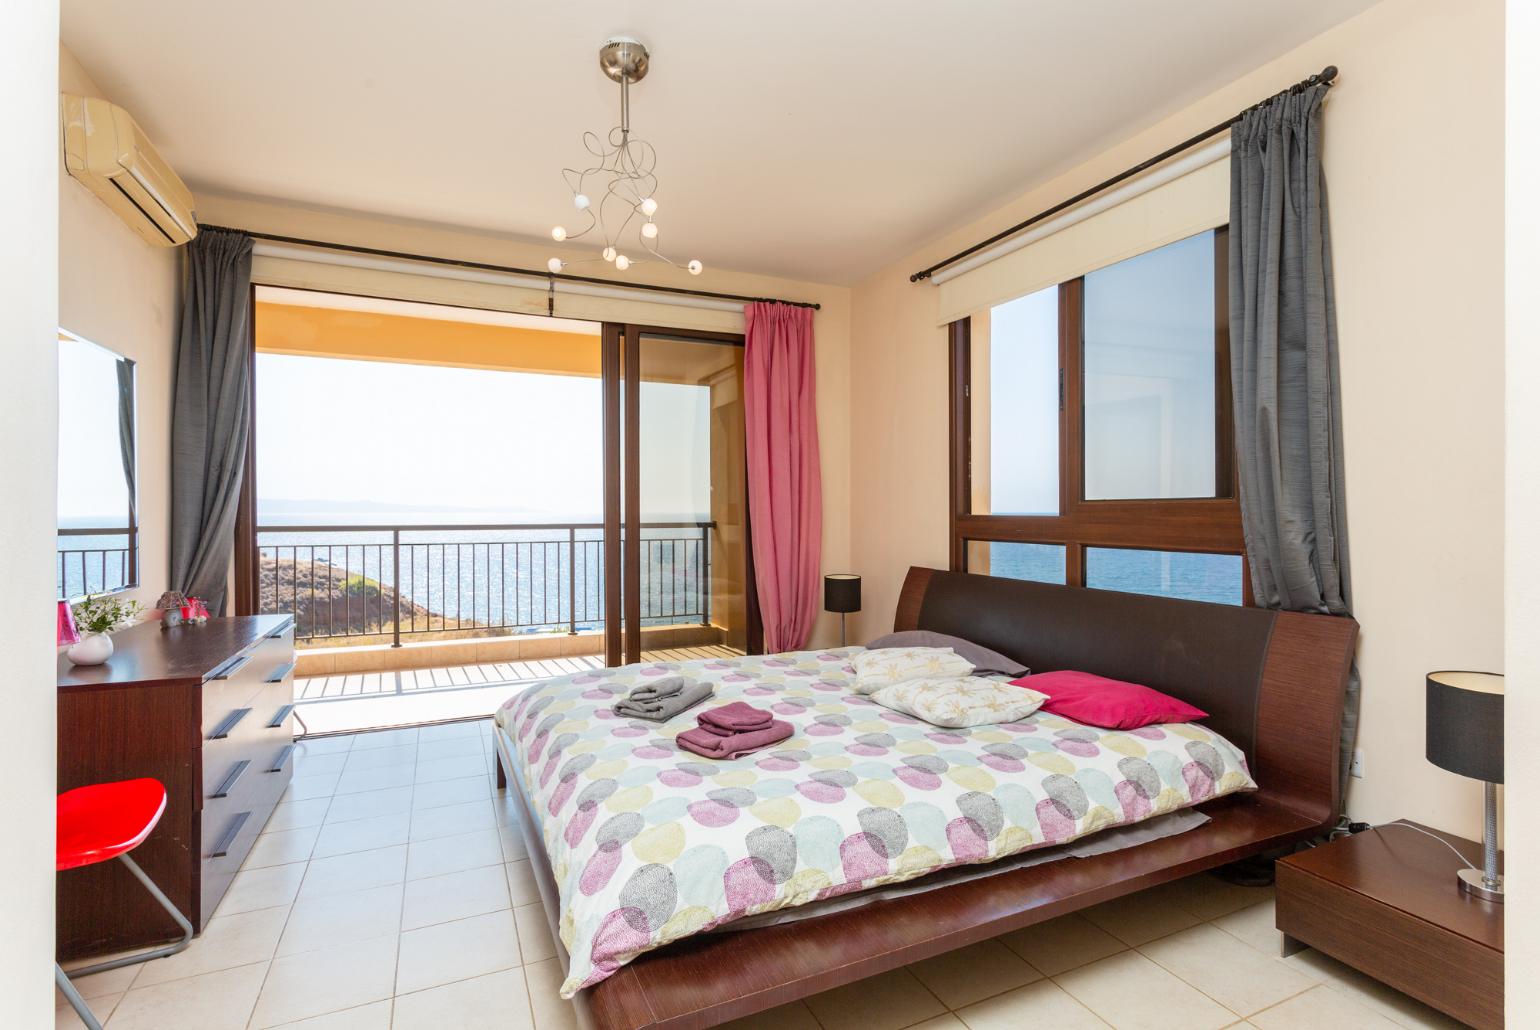 Double bedroom with en suite bathroom, A/C, and terrace access with sea views